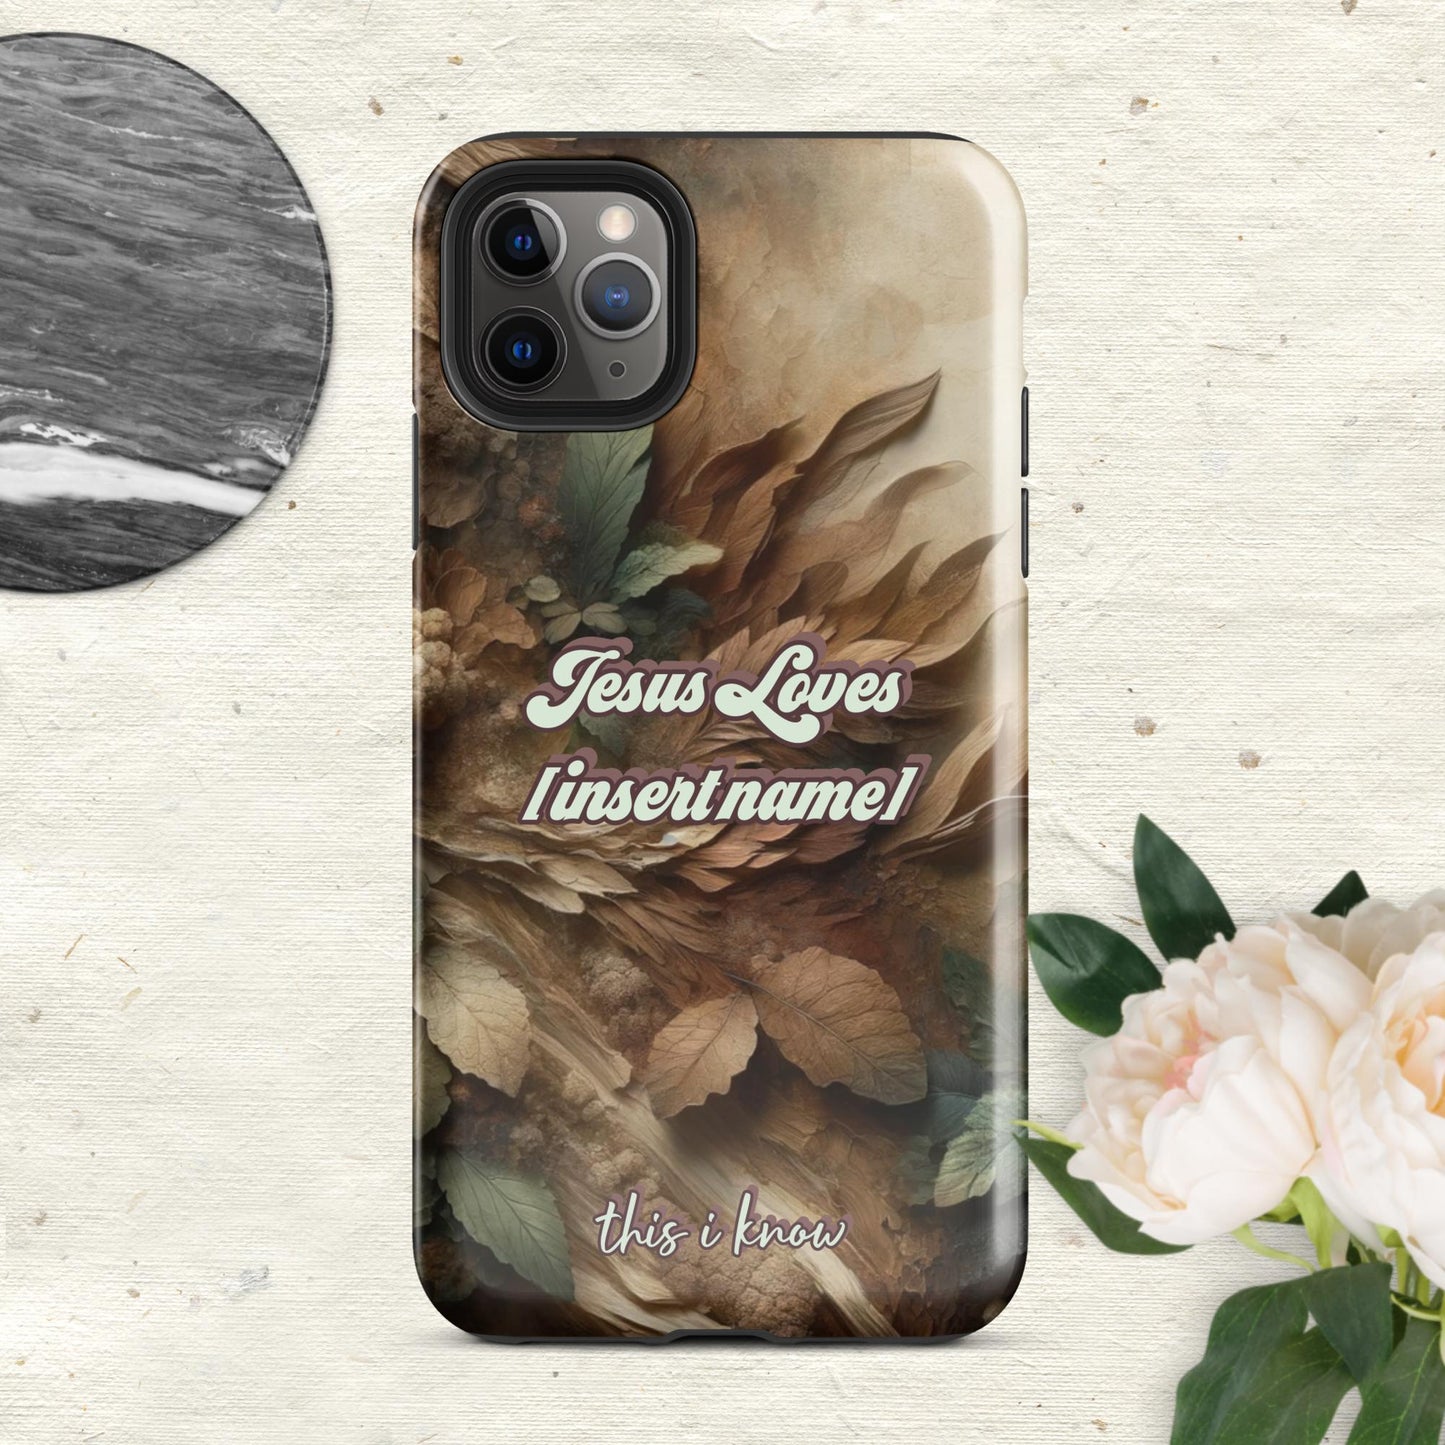 Trendyguard Glossy / iPhone 11 Pro Max Jesus Loves [insertname] This I Know | Custom Tough Case for iPhone®